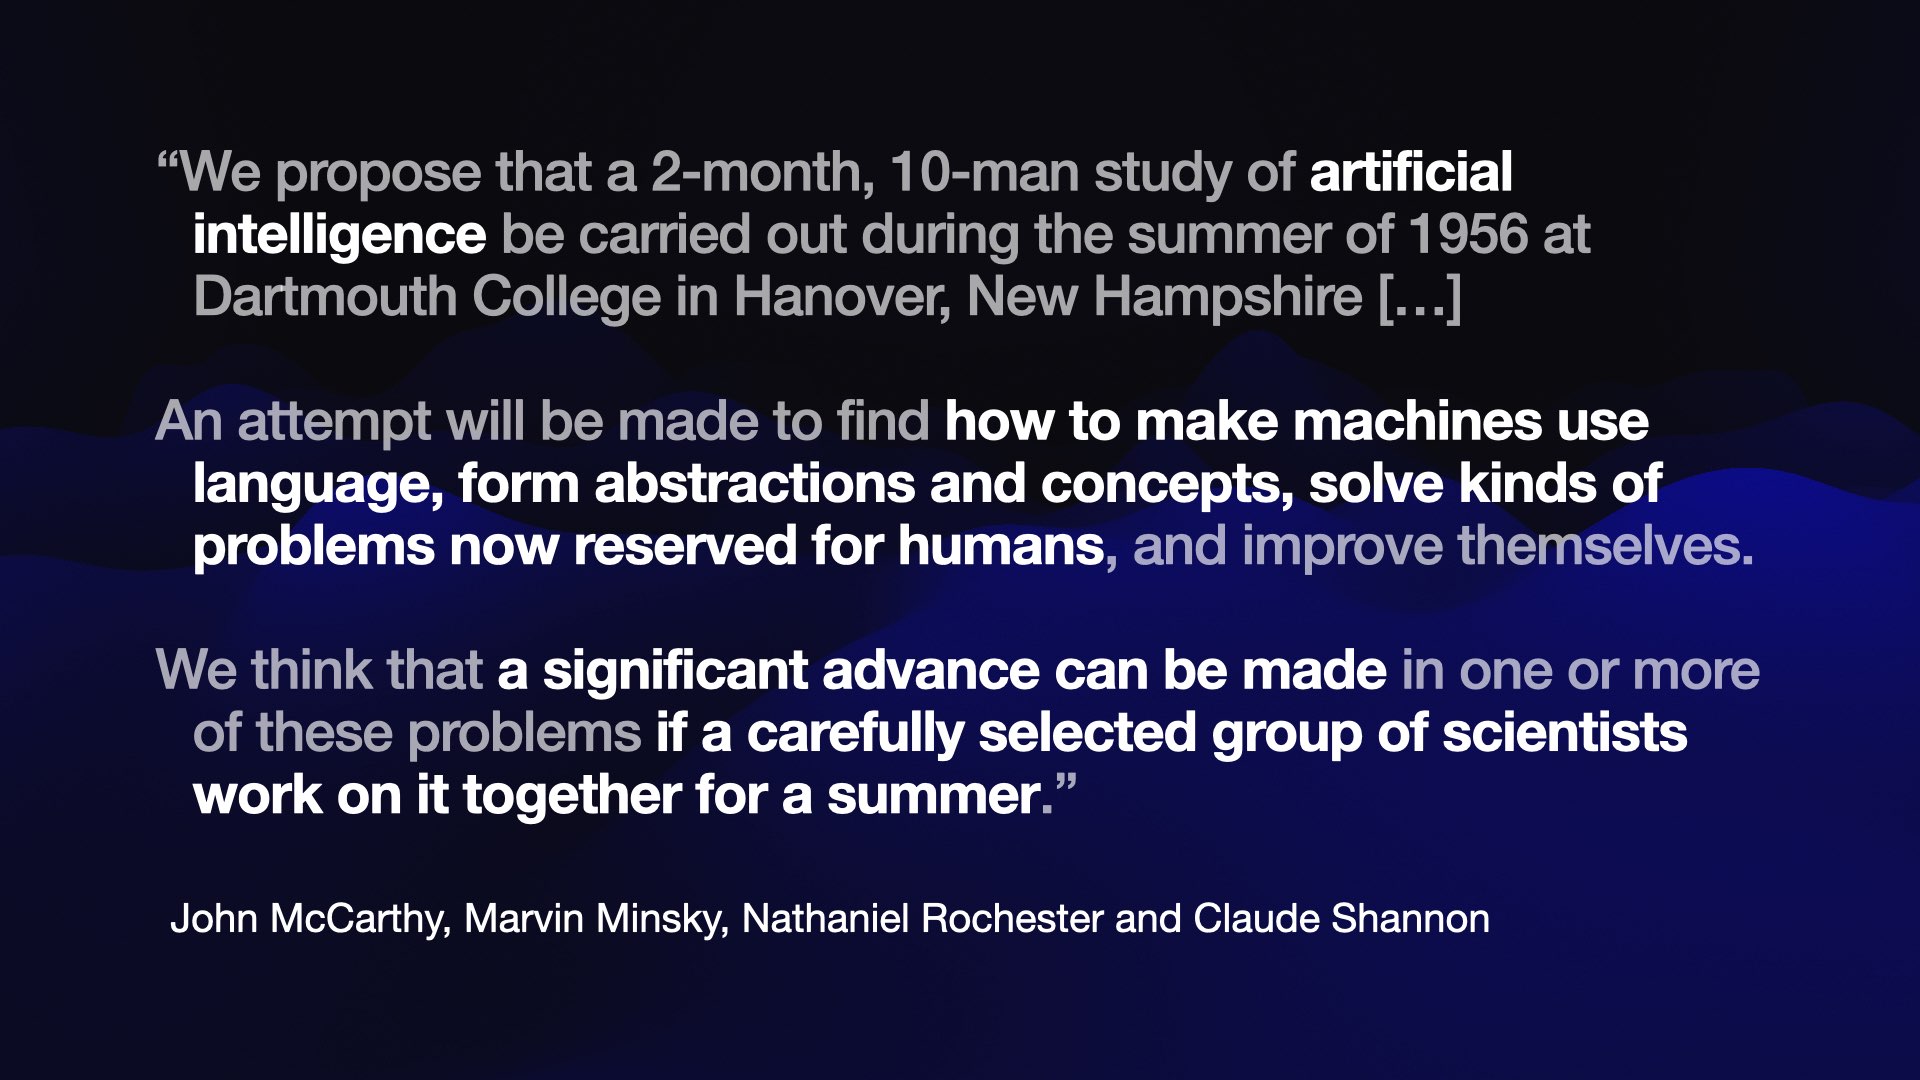 “We propose that a 2-month, 10-man study of artificial intelligence be carried out during the summer of 1956 at Dartmouth College in Hanover, New Hampshire [...]  An attempt will be made to find how to make machines use language, form abstractions and concepts, solve kinds of problems now reserved for humans, and improve themselves.  We think that a significant advance can be made in one or more of these problems if a carefully selected group of scientists work on it together for a summer.”  John McCarthy, Marvin Minsky, Nathaniel Rochester and Claude Shannon 